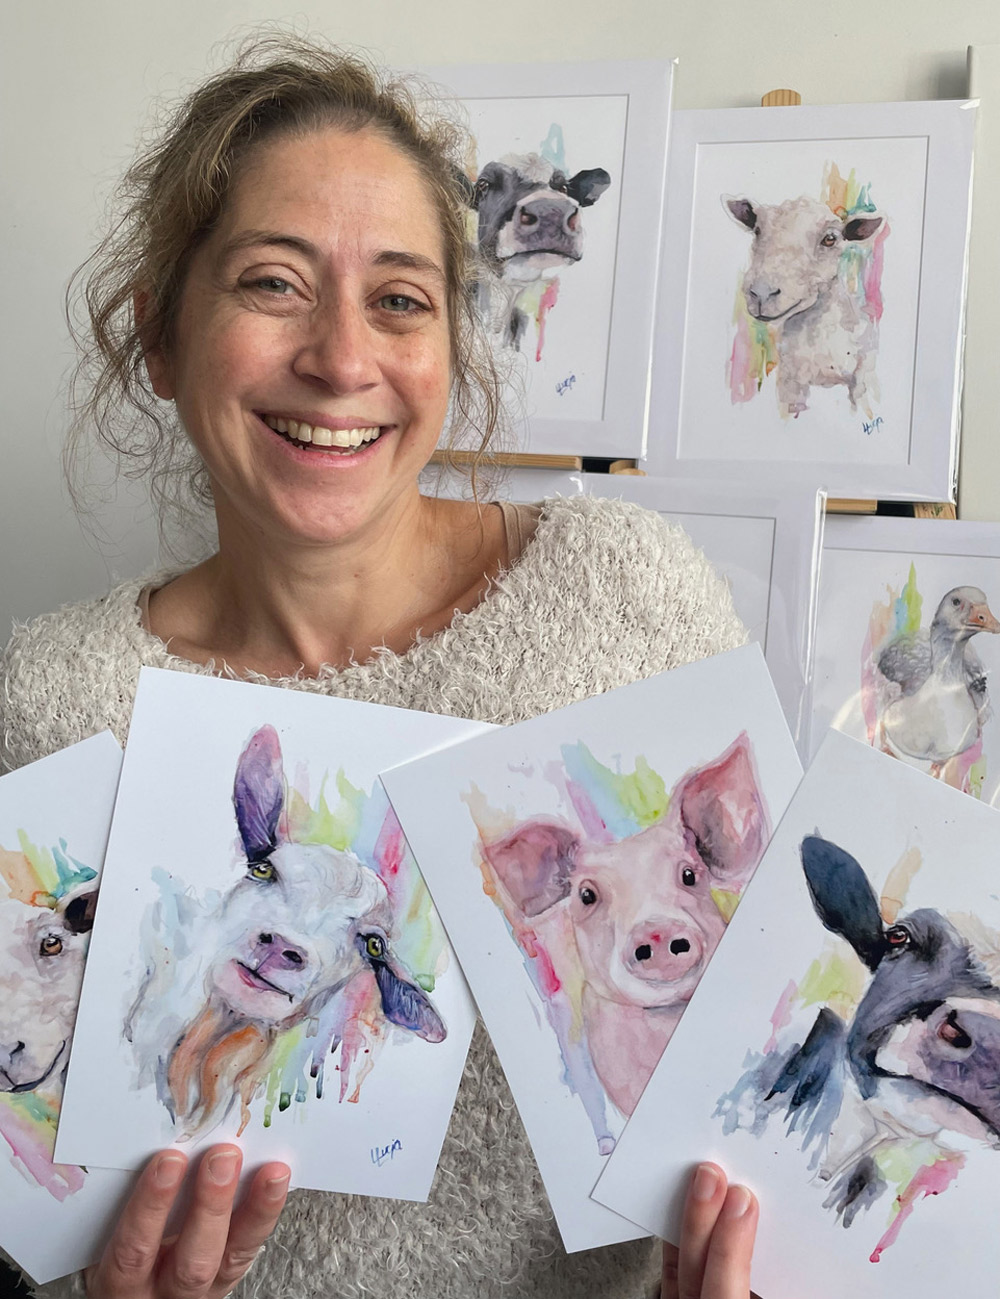 Lucia Lovatt’s paintings capture the personality of animals, earning rave reviews